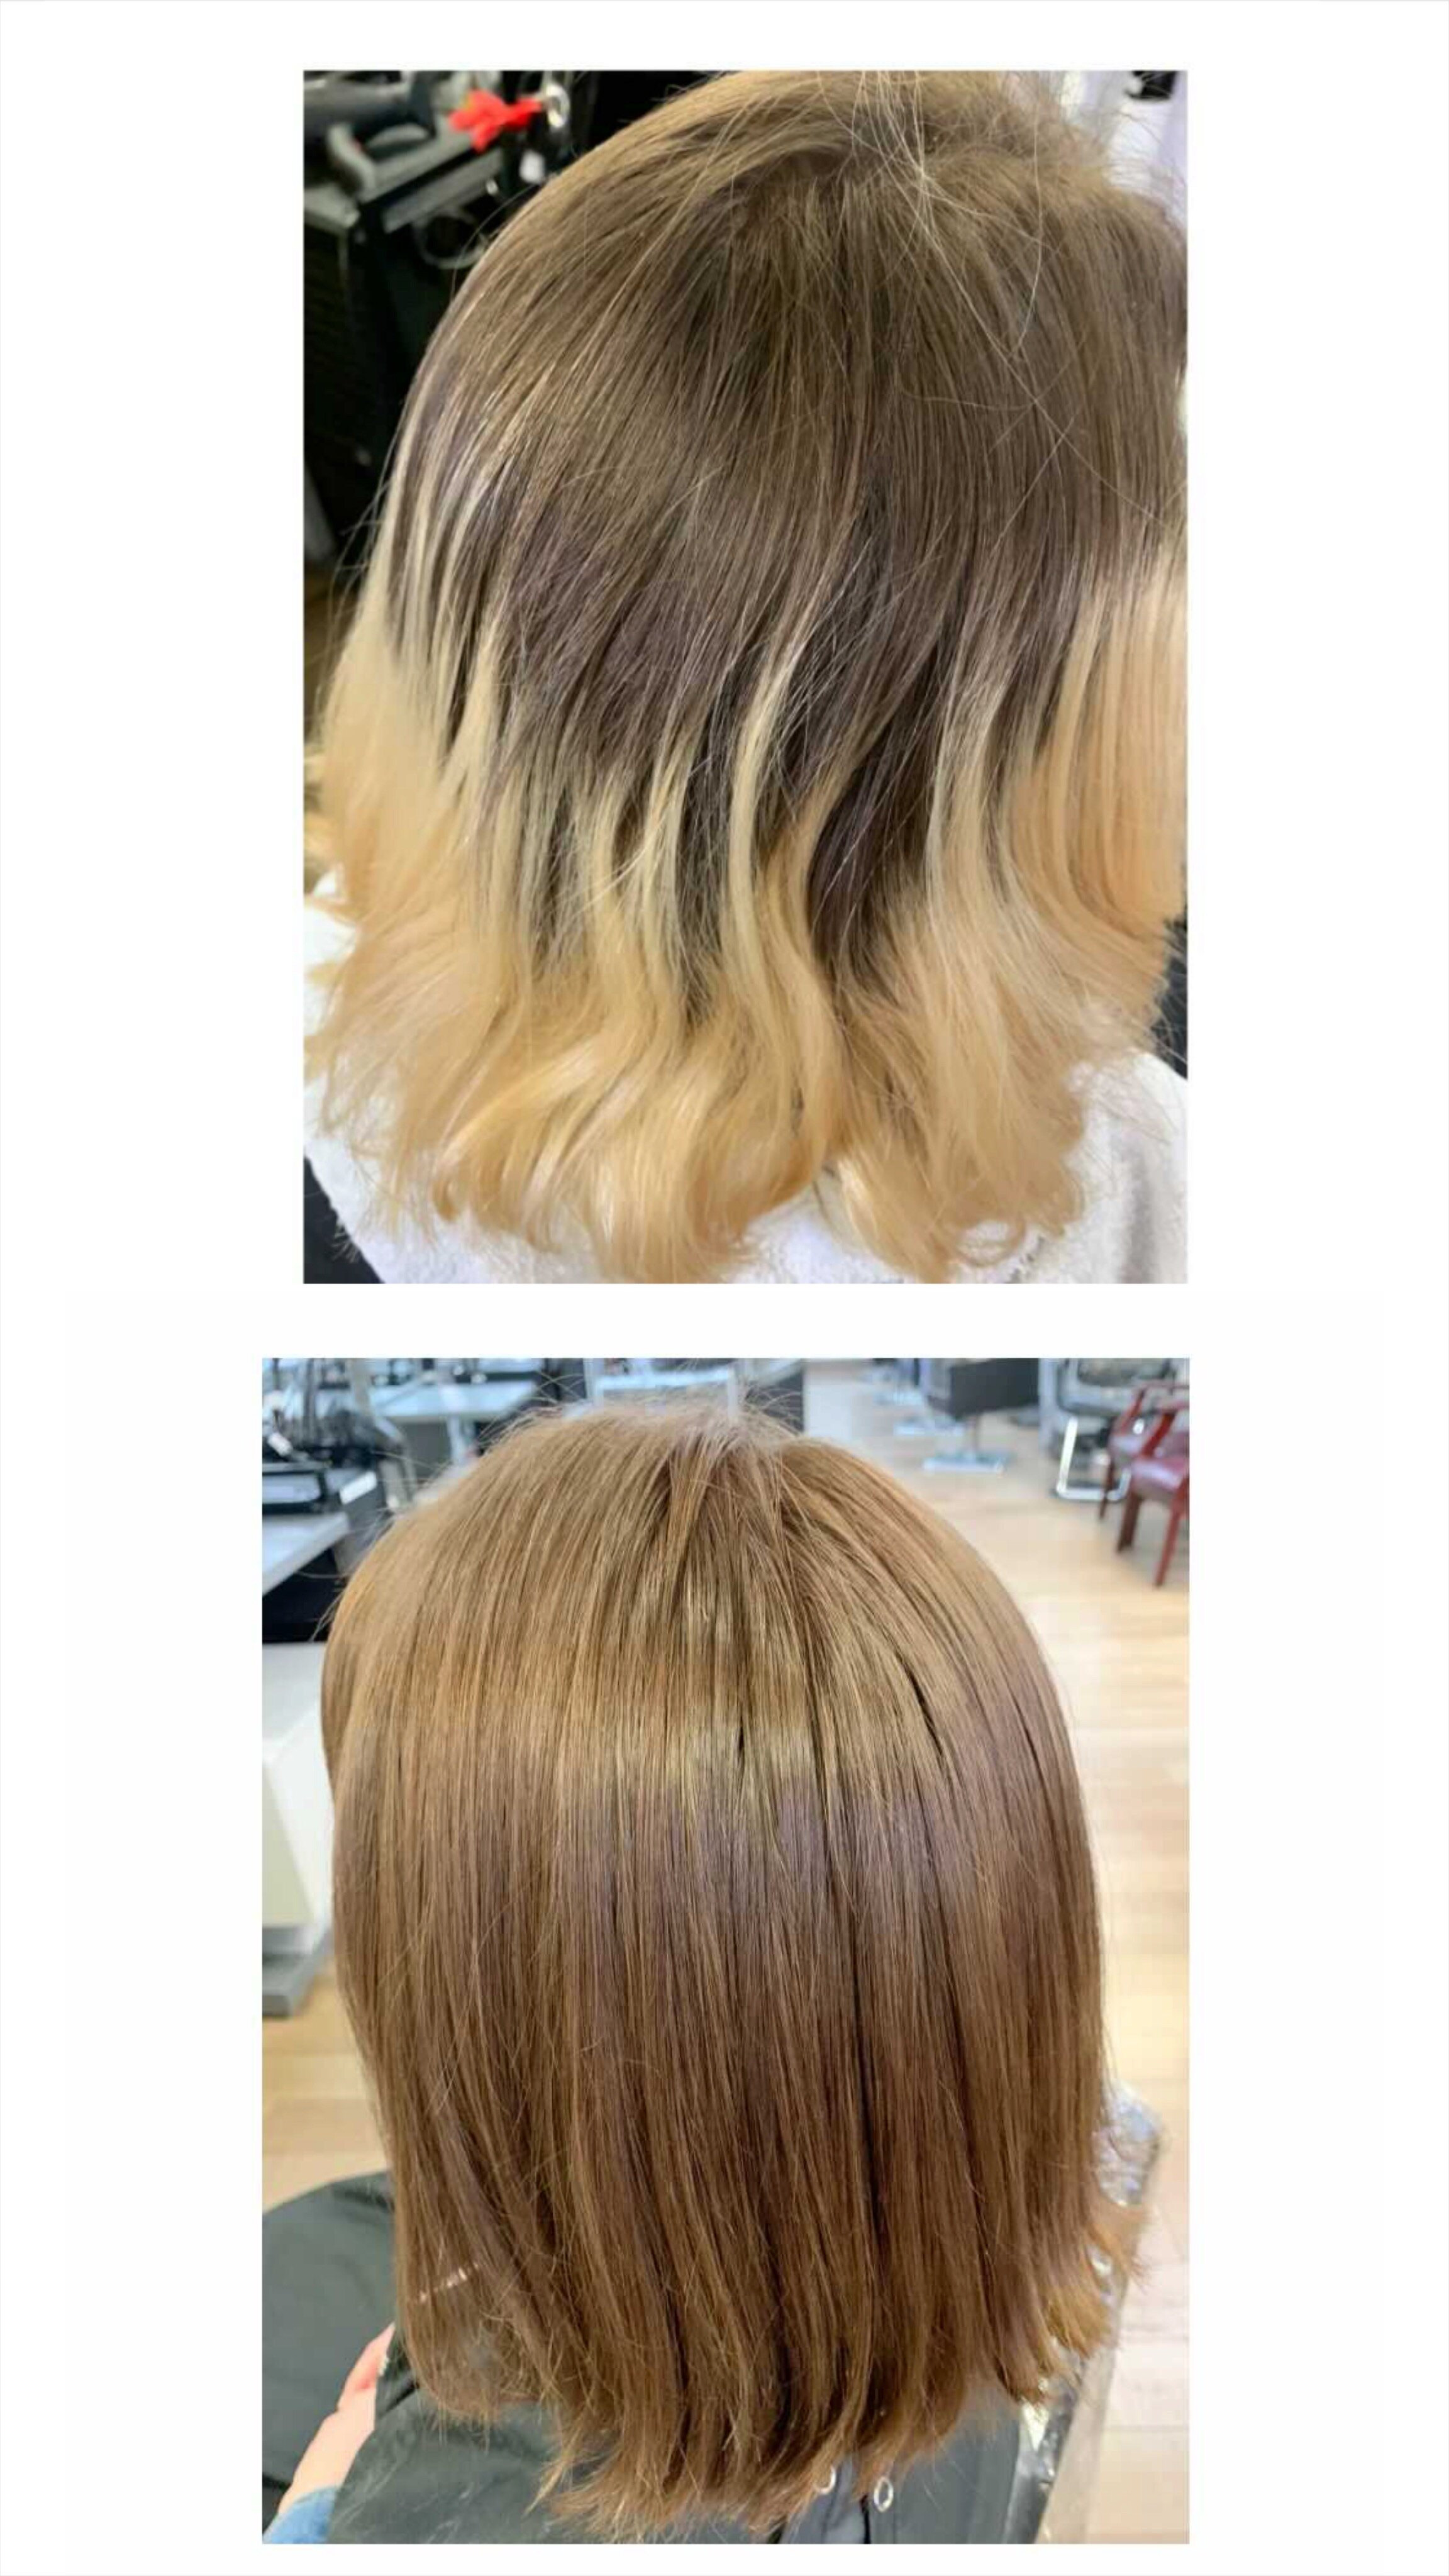  Full color - before &amp; after  